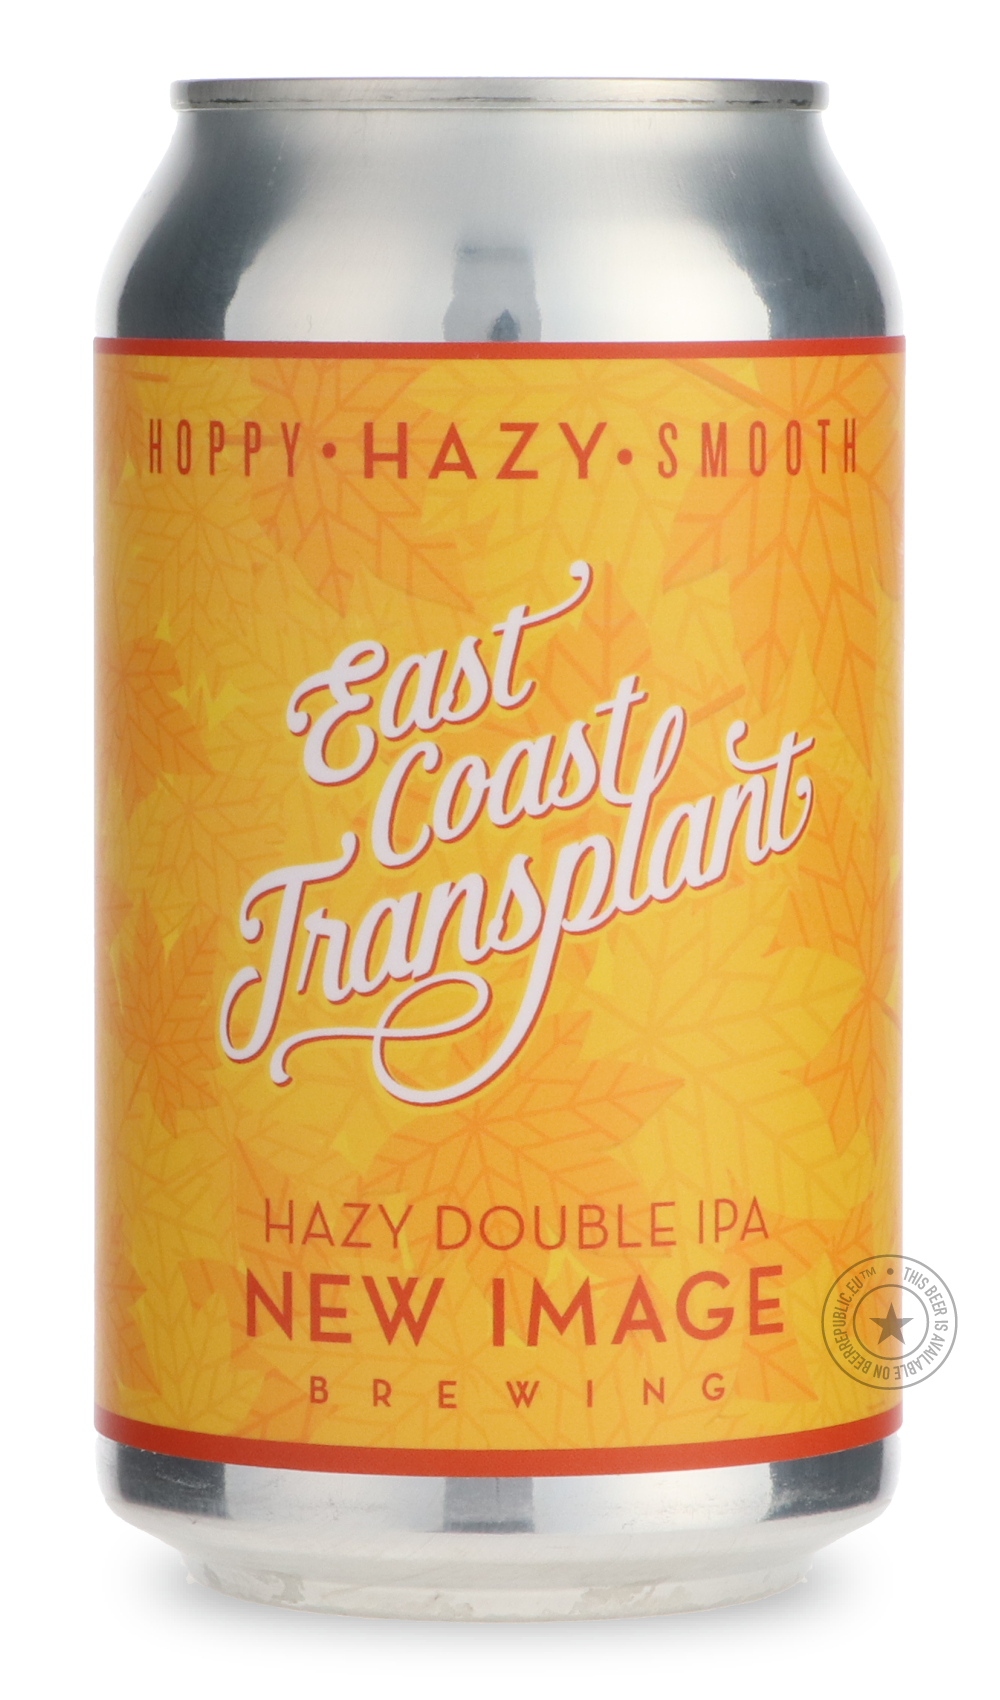 -New Image- East Coast Transplant-IPA- Only @ Beer Republic - The best online beer store for American & Canadian craft beer - Buy beer online from the USA and Canada - Bier online kopen - Amerikaans bier kopen - Craft beer store - Craft beer kopen - Amerikanisch bier kaufen - Bier online kaufen - Acheter biere online - IPA - Stout - Porter - New England IPA - Hazy IPA - Imperial Stout - Barrel Aged - Barrel Aged Imperial Stout - Brown - Dark beer - Blond - Blonde - Pilsner - Lager - Wheat - Weizen - Amber -